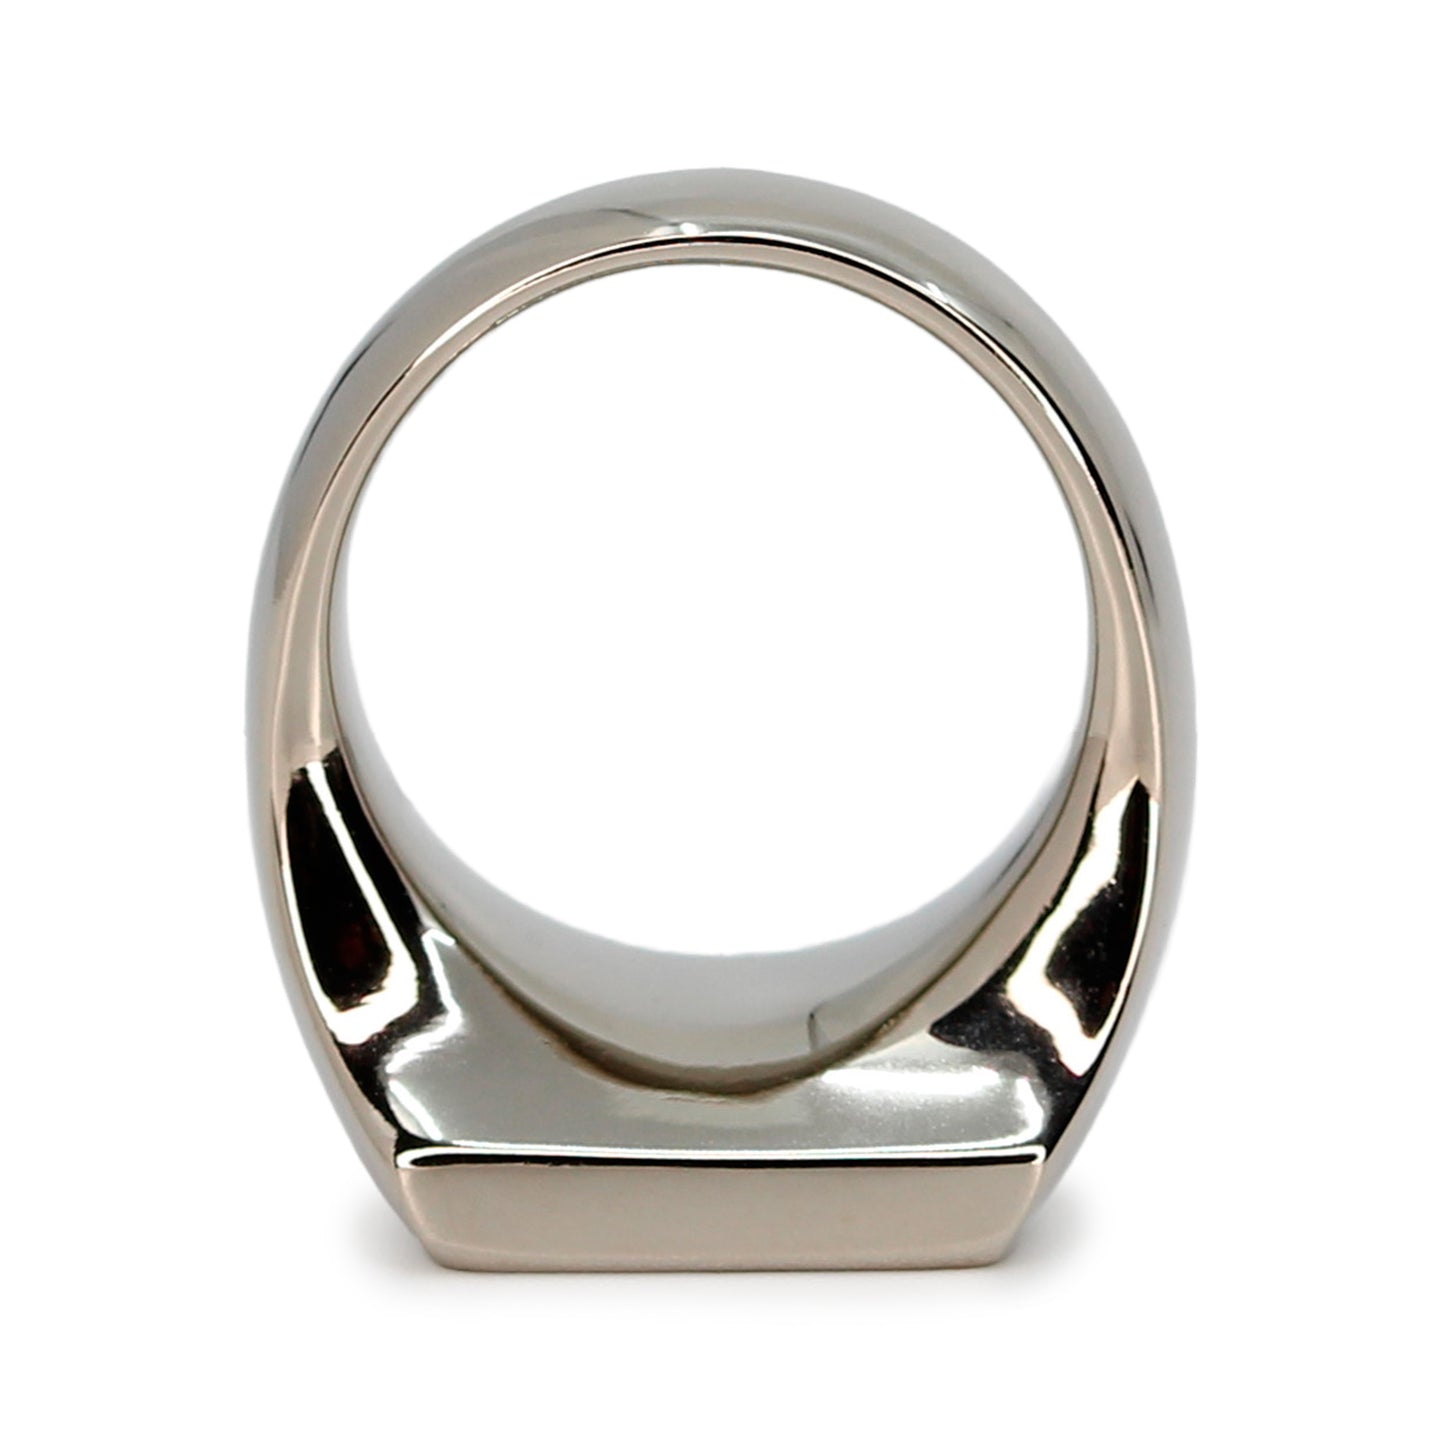 Single silver-colored titanium signet ring, 15x15 mm wide surface with an engraved lightning bolt. Image shows a view of the ring front down.